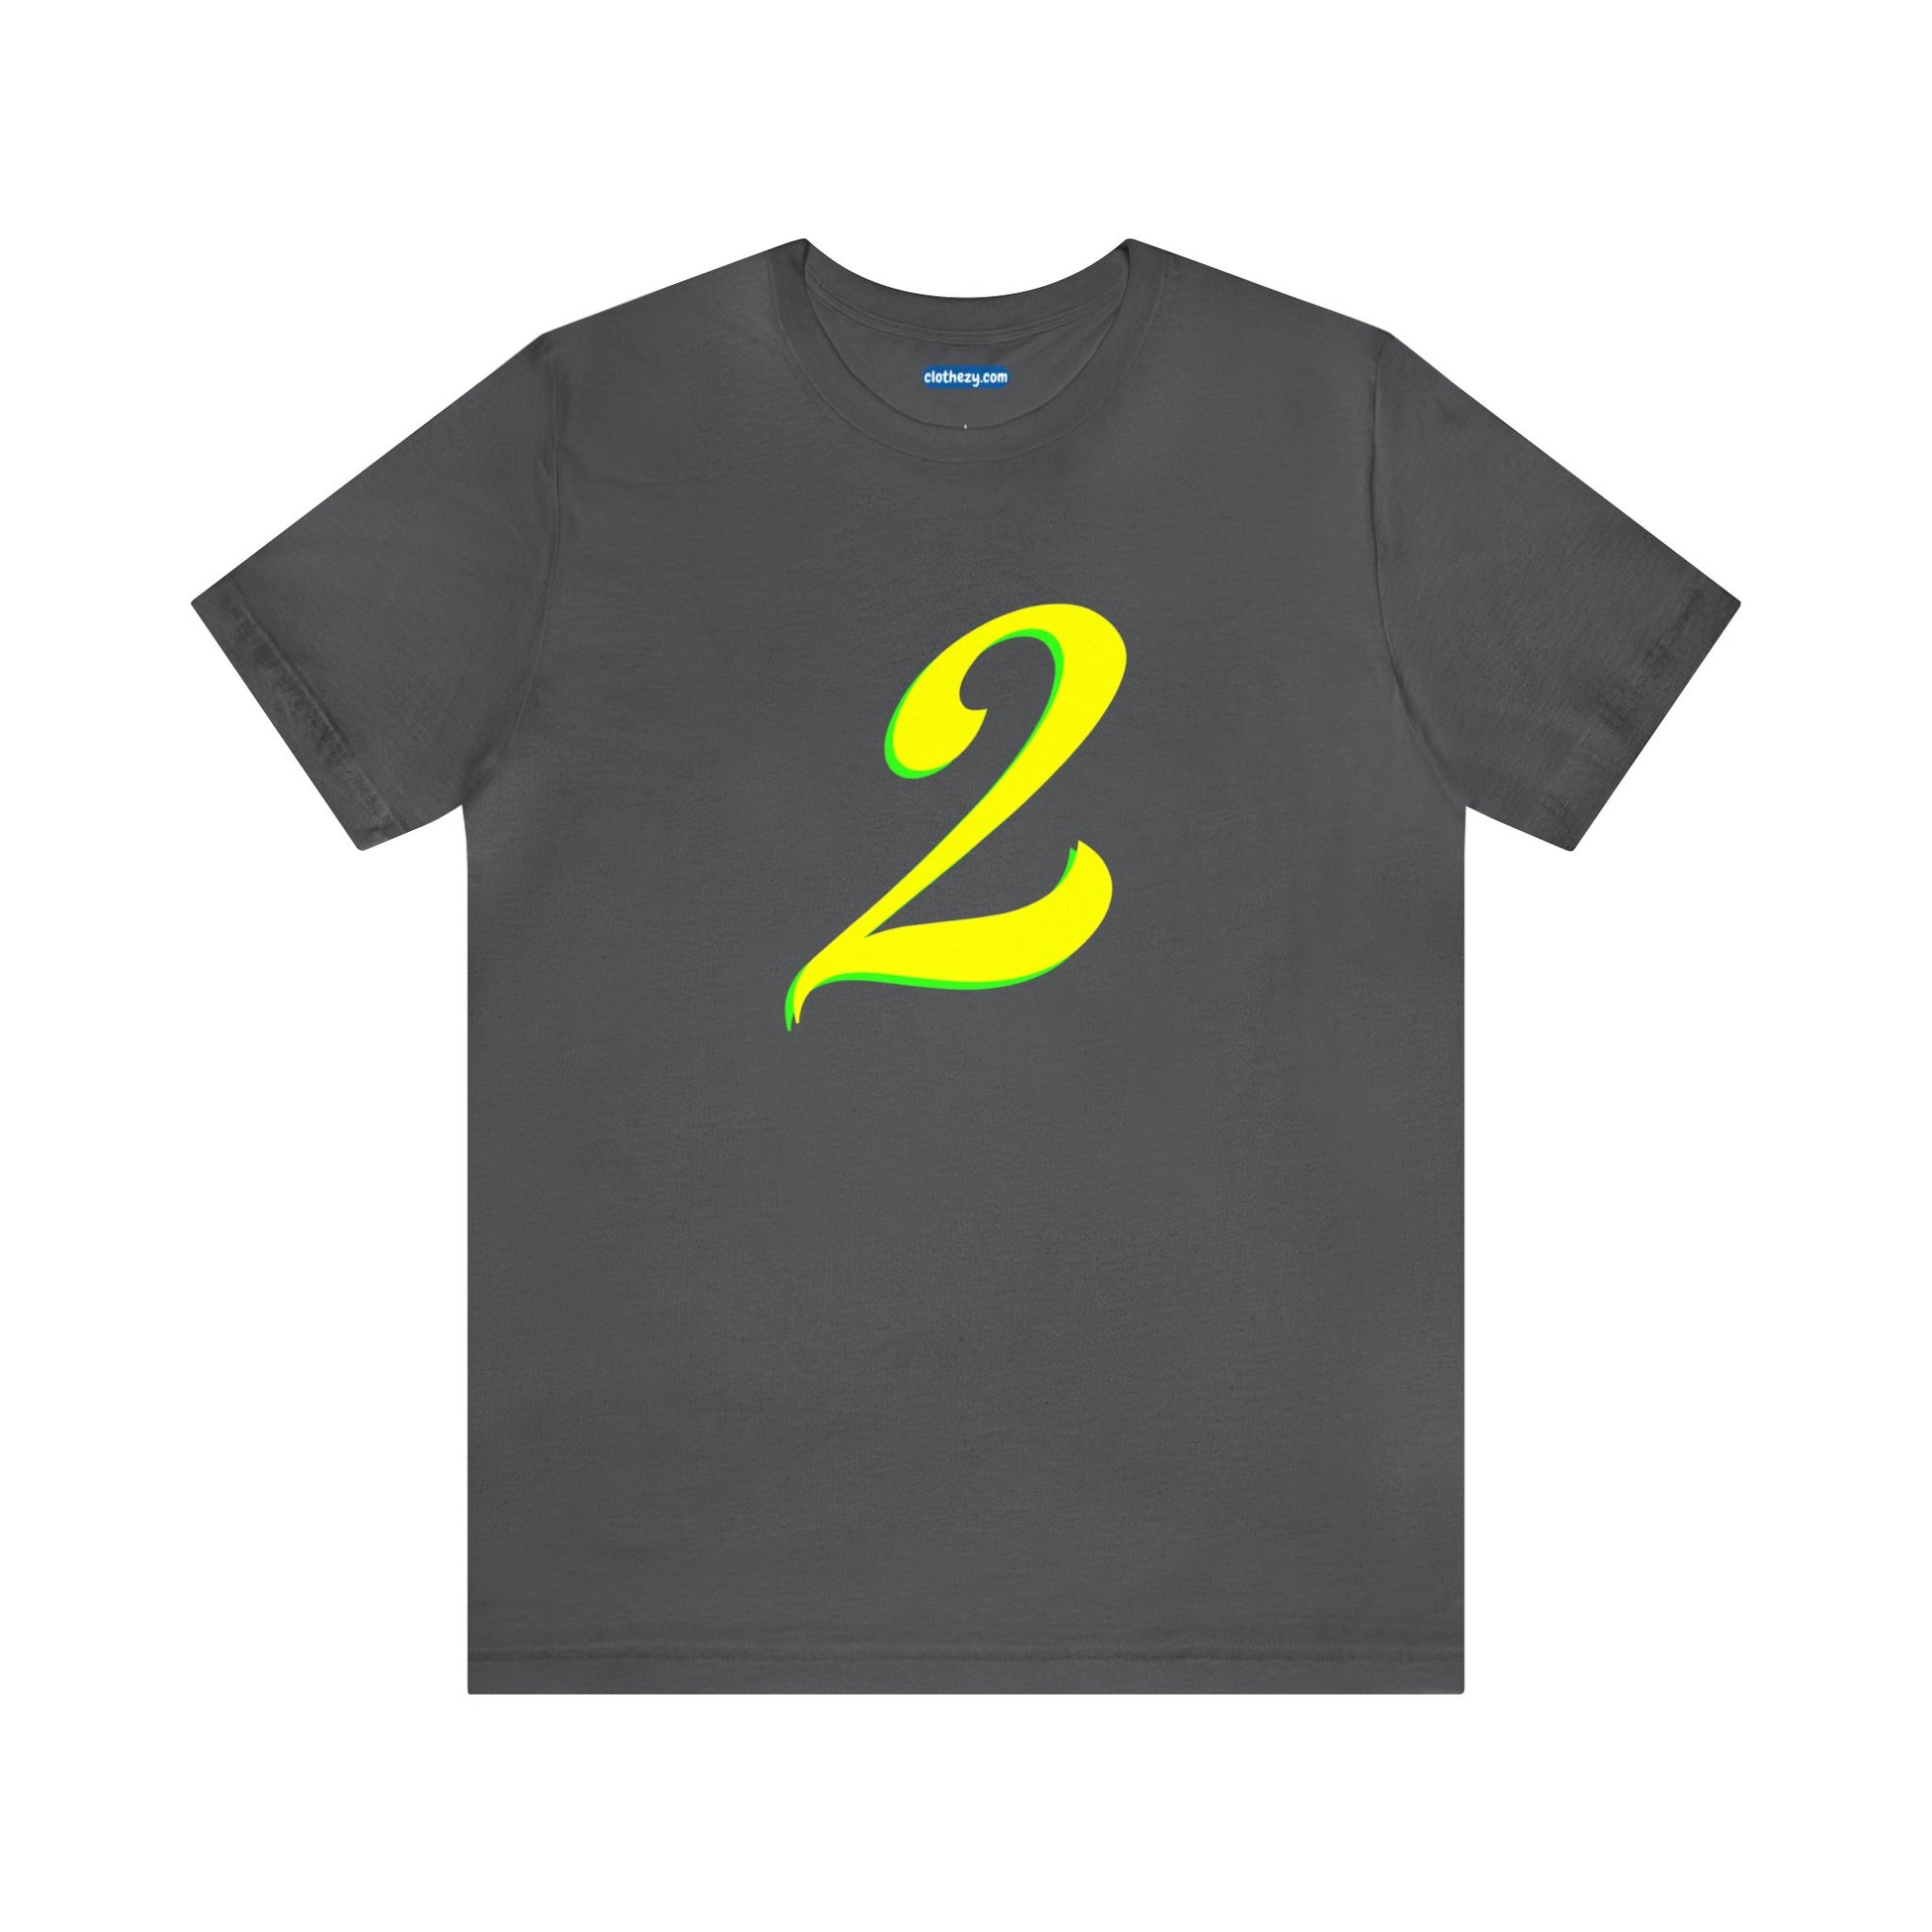 Number 2 Design - Soft Cotton Tee for birthdays and celebrations, Gift for friends and family, Multiple Options by clothezy.com in Black Size Small - Buy Now